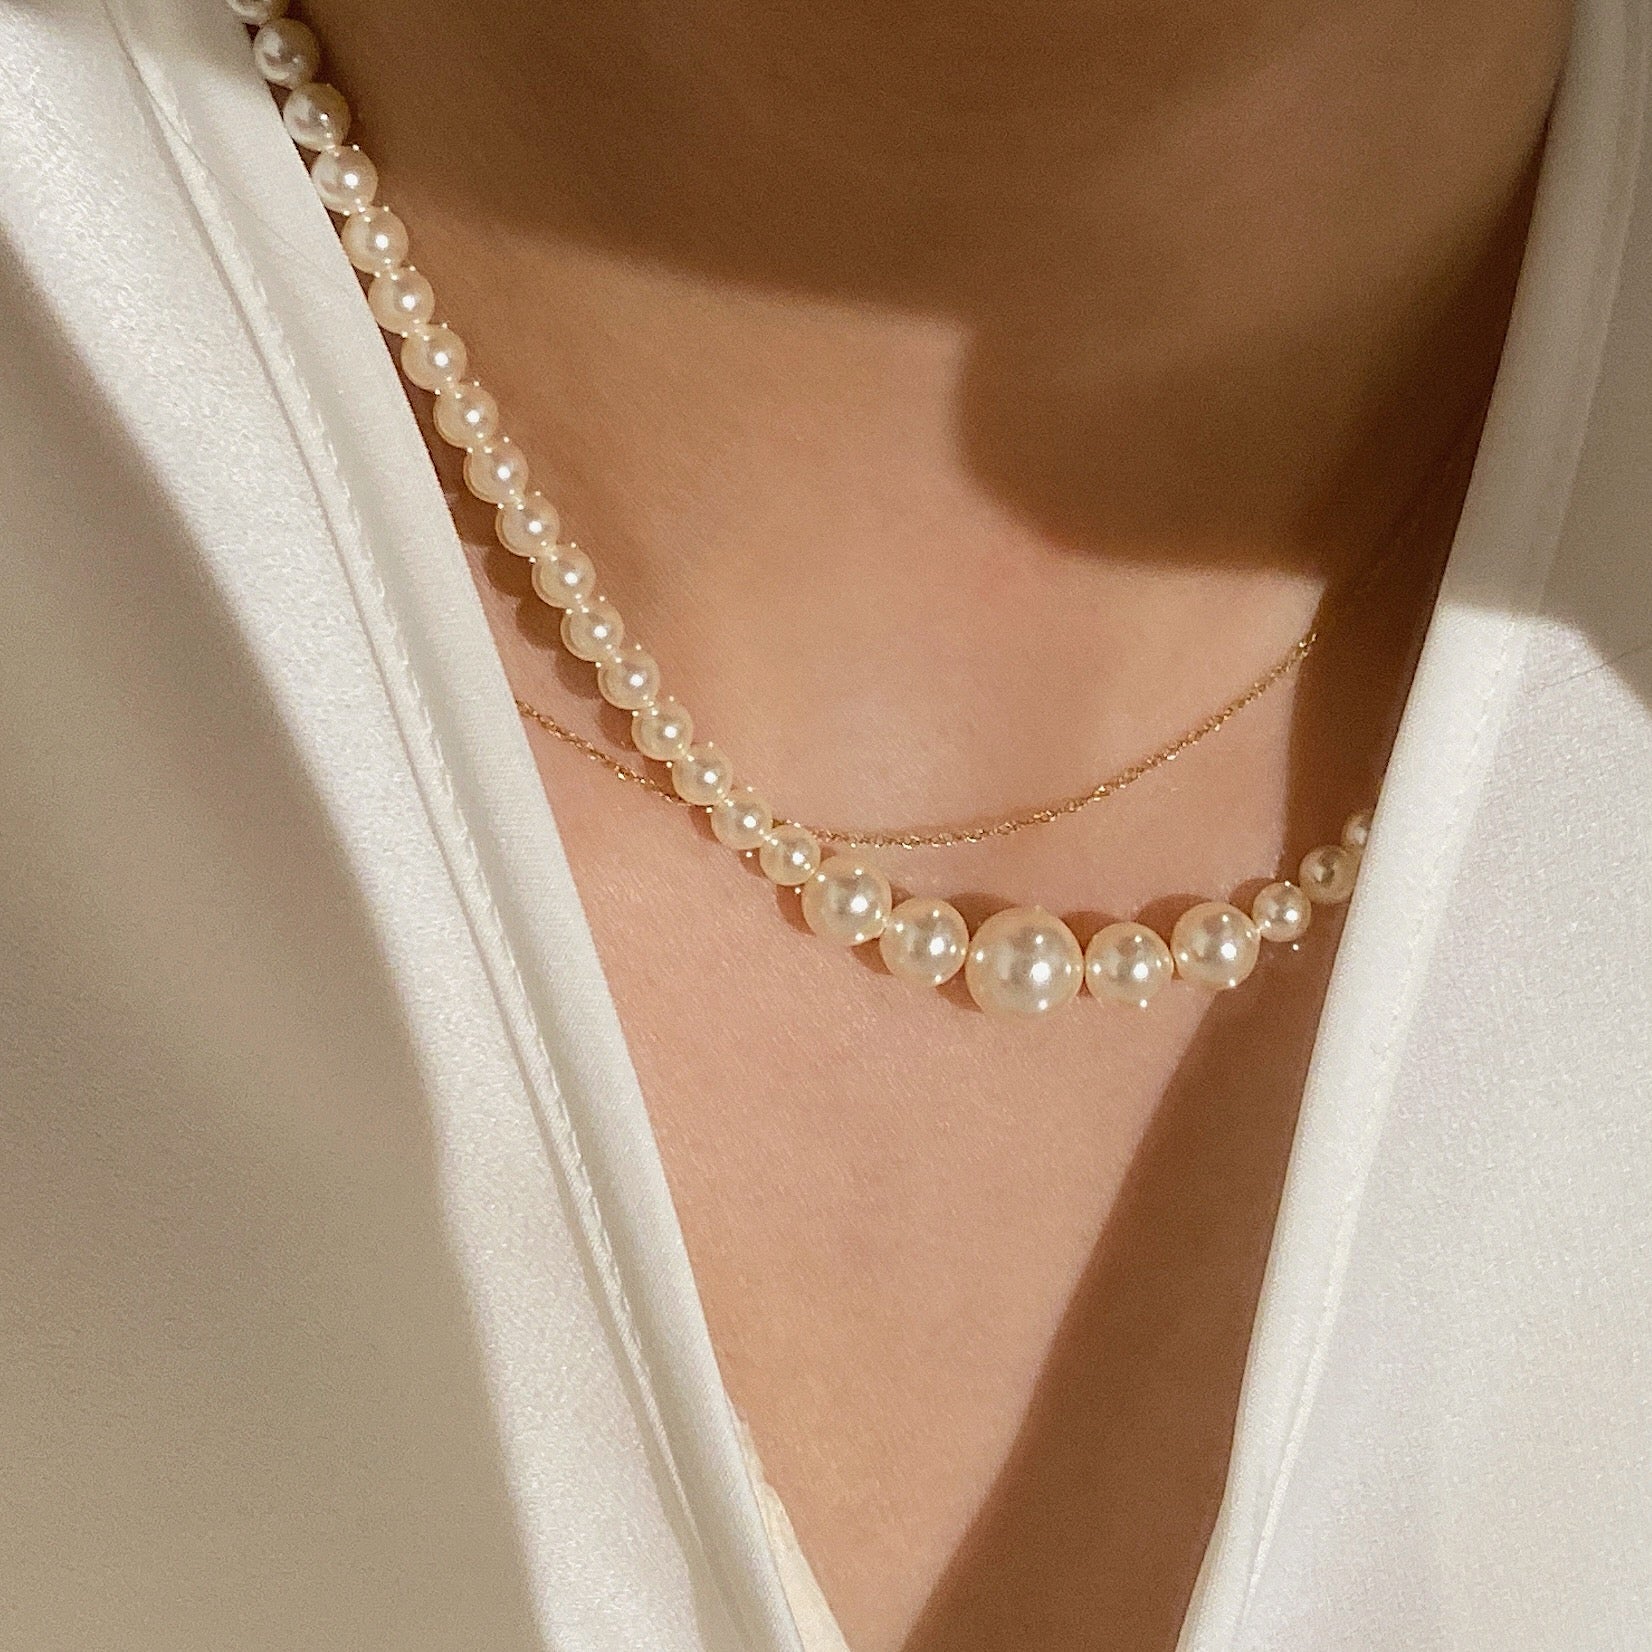 Handmade Artificial Pearls 14K Gold-Covered Necklace